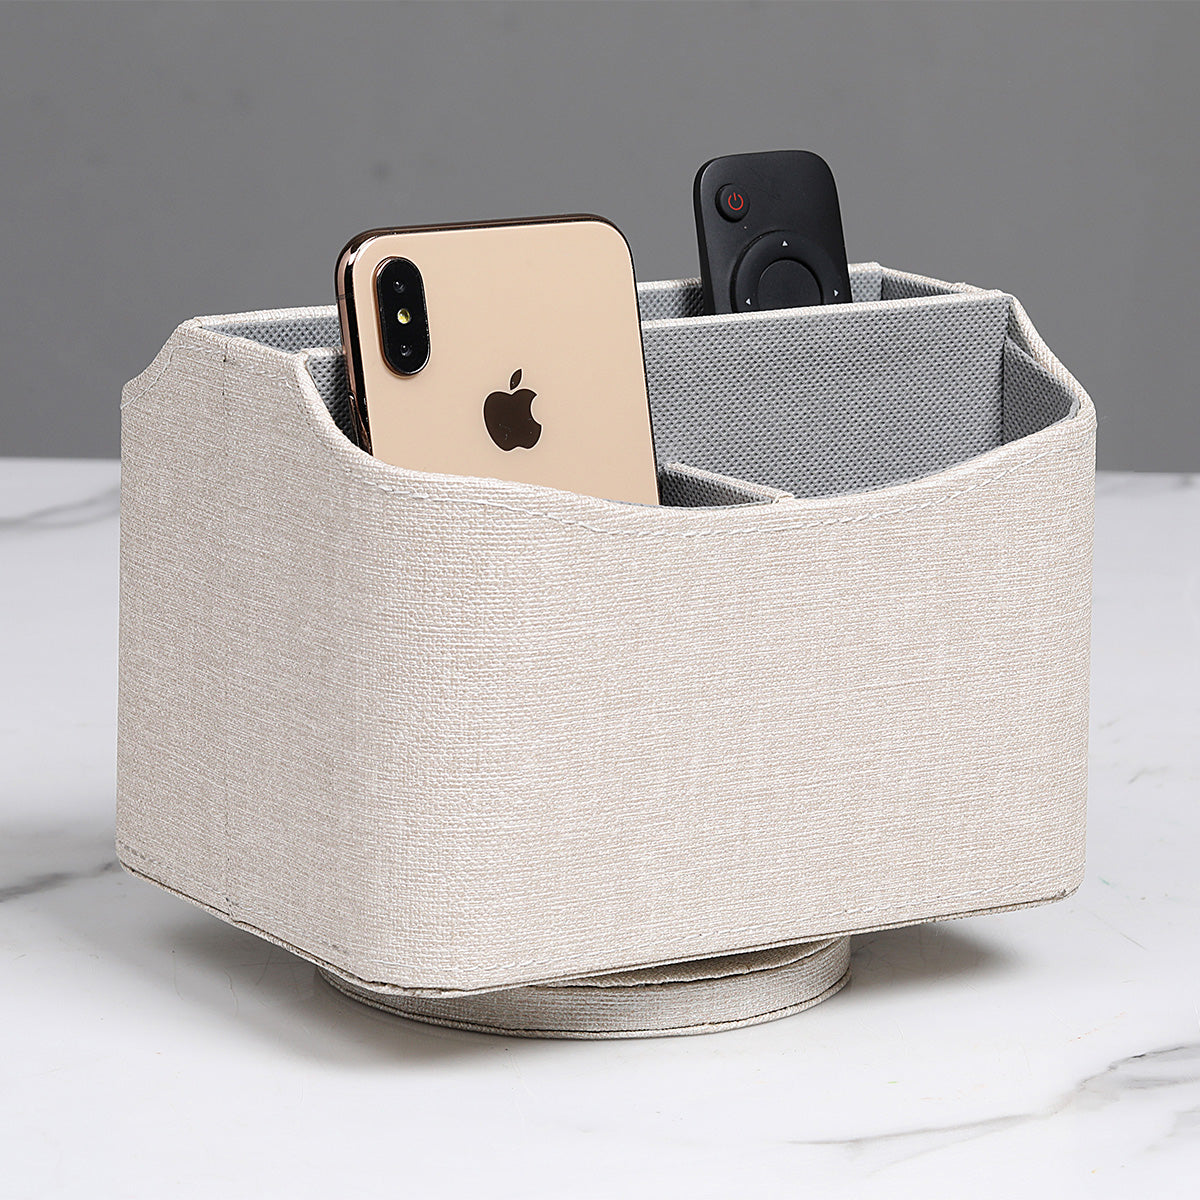 UnionBasic Rotating Desk Organizer, 360 Degree Desk Spinning Caddy, Linen Texture Faux Leather